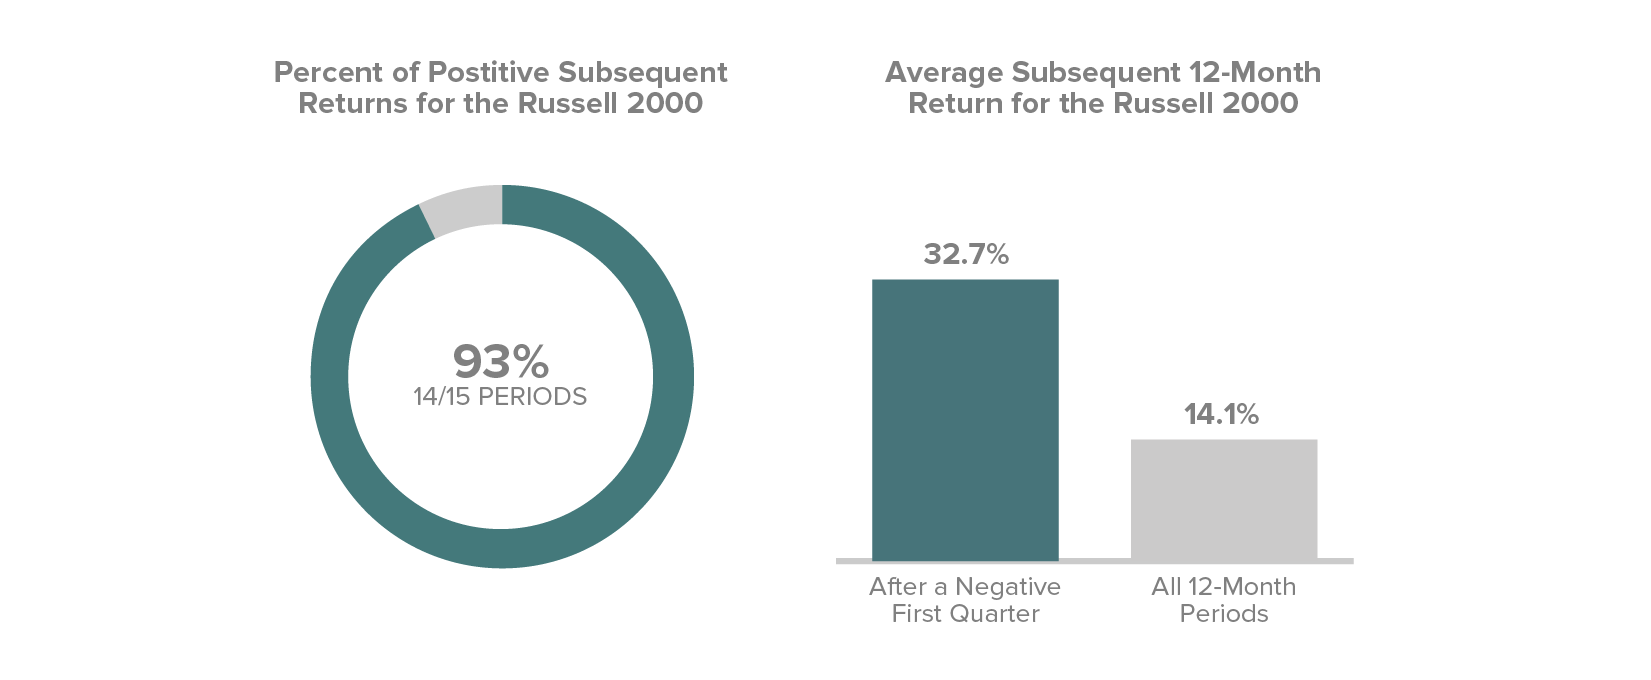 Percent of Positive Subsequent Returns for R2K: 93% in 14/15 periods. Average Subsequent 12-Month return for R2K. 32.7% for after a negative first quarter and 14.1% for all 12-month periods